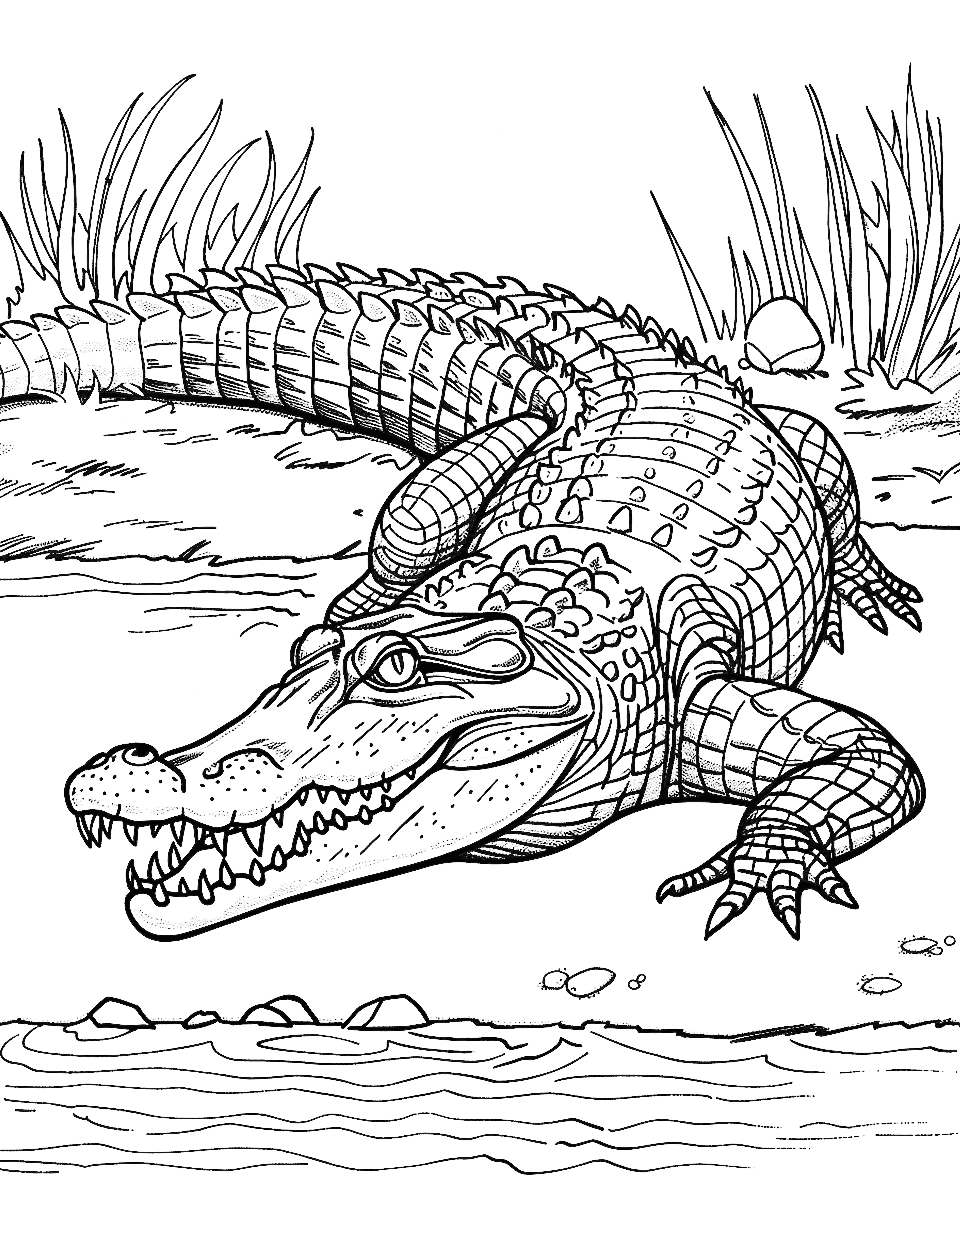 Crocodile in the Wild Coloring Page - A majestic crocodile with its mouth slightly open, lying on the riverbank.